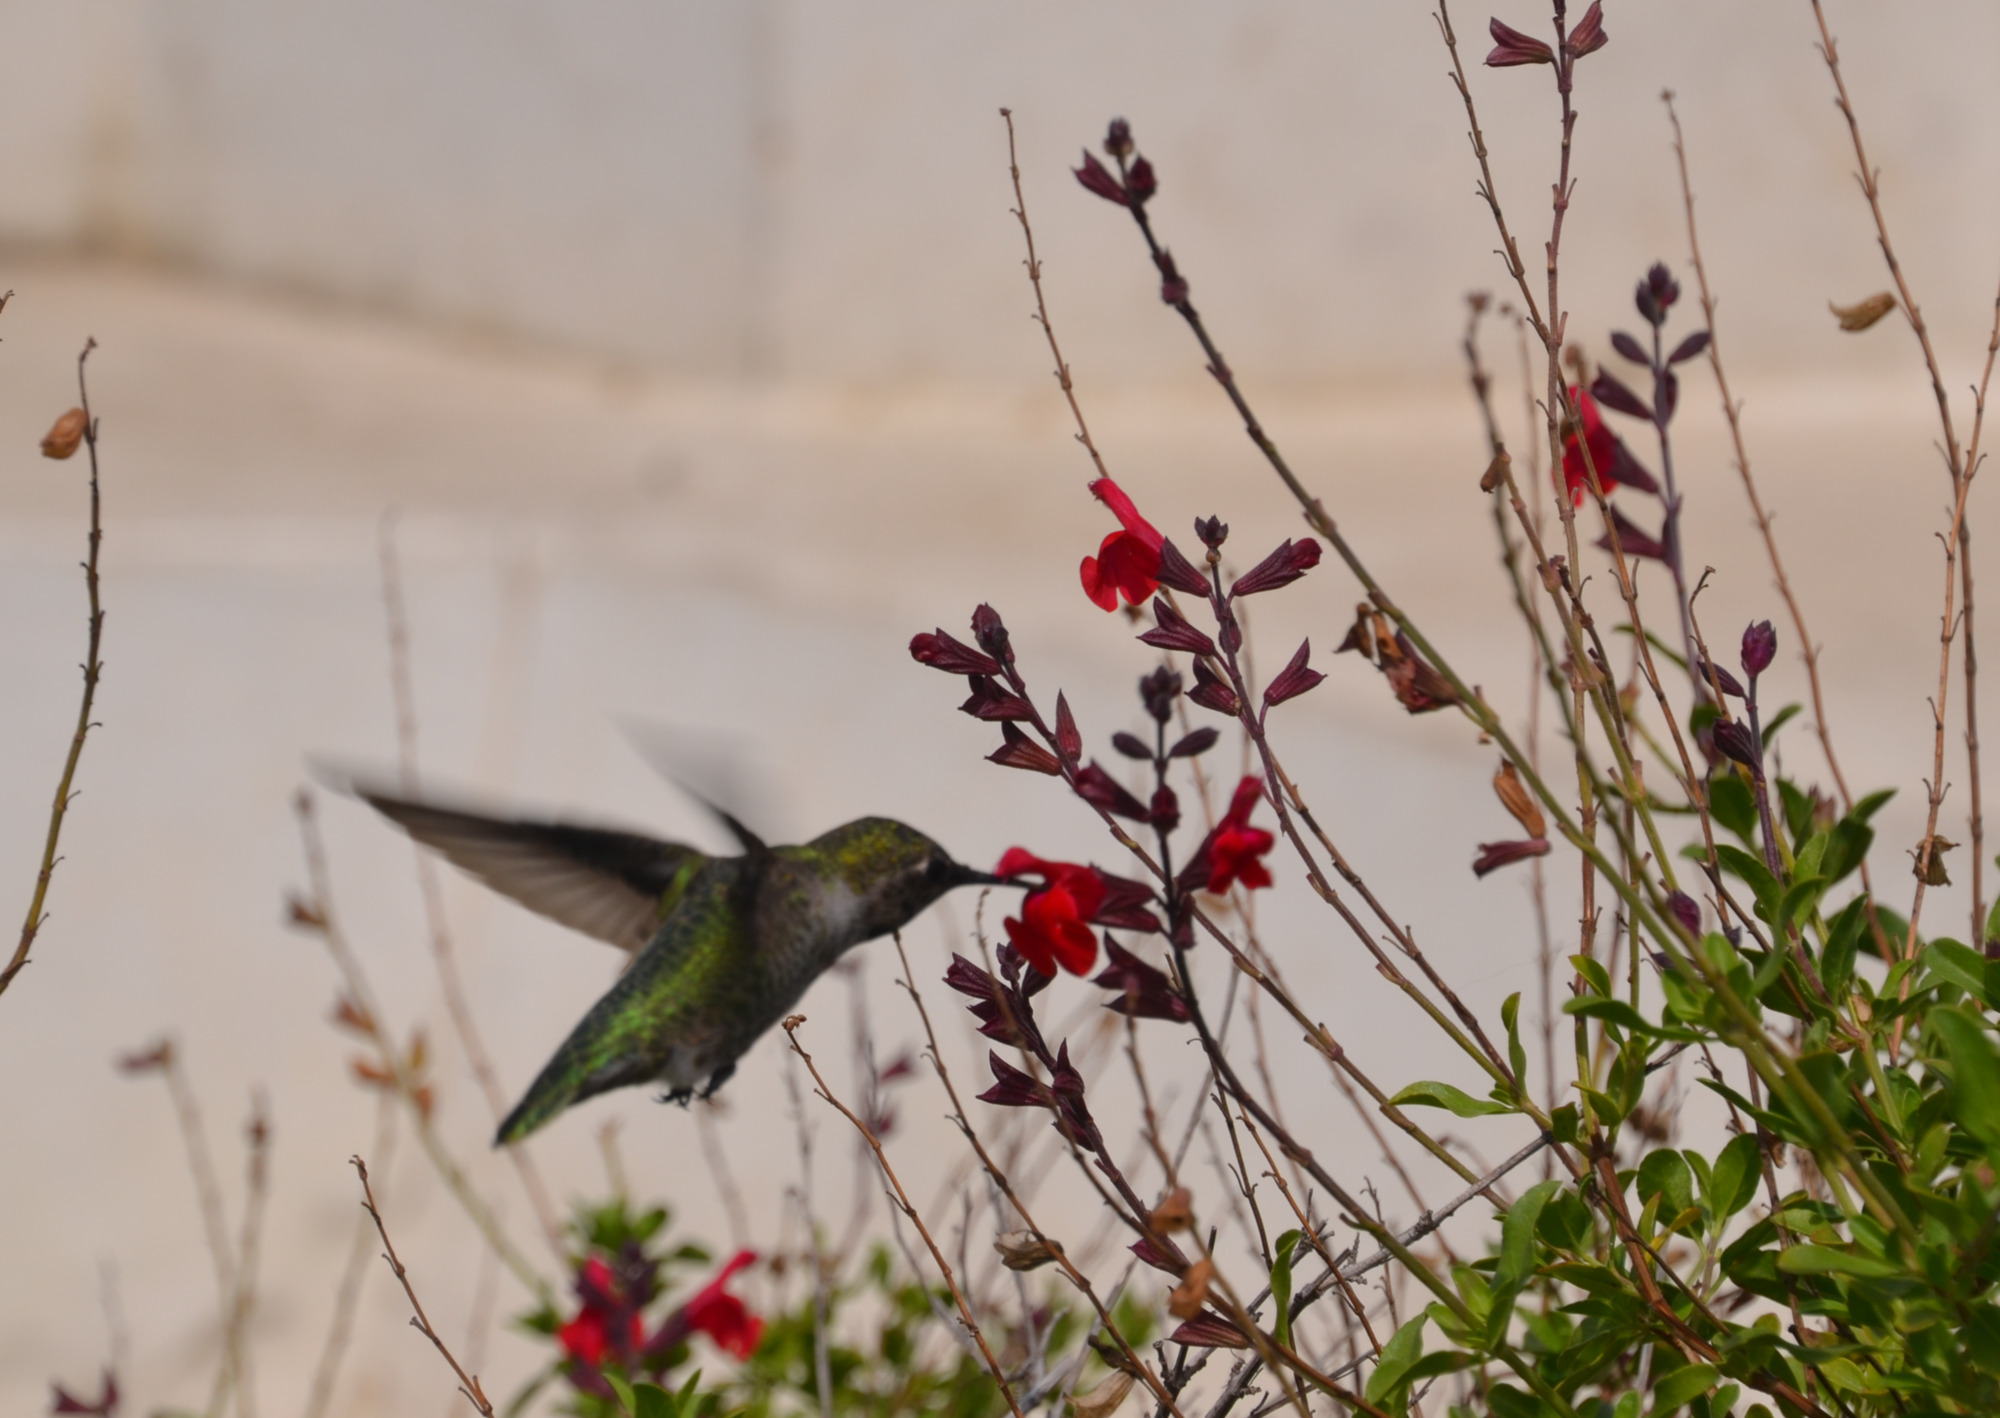 hummingbird at Griffith Observatory, Los Angeles